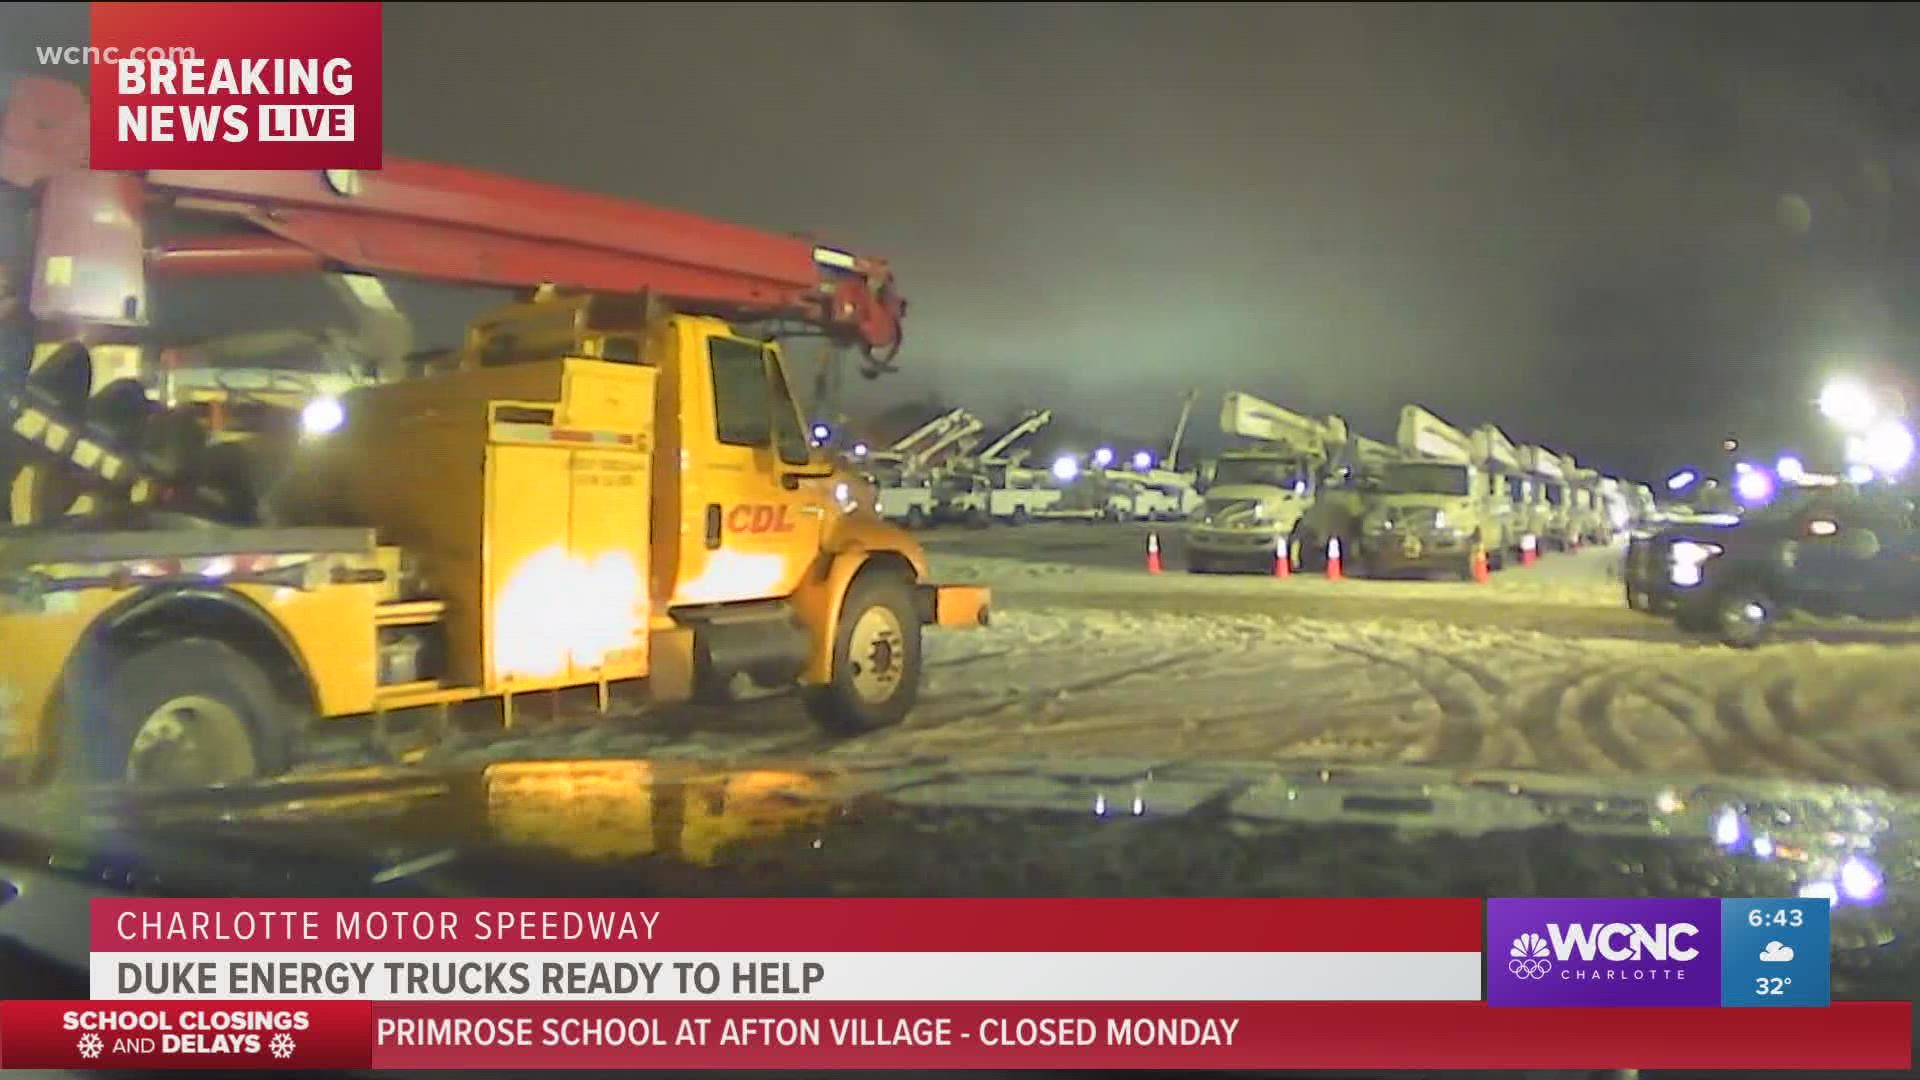 Power crews from out of town are staged at Charlotte Motor Speedway to help resolve outages caused by Sunday's winter storm.